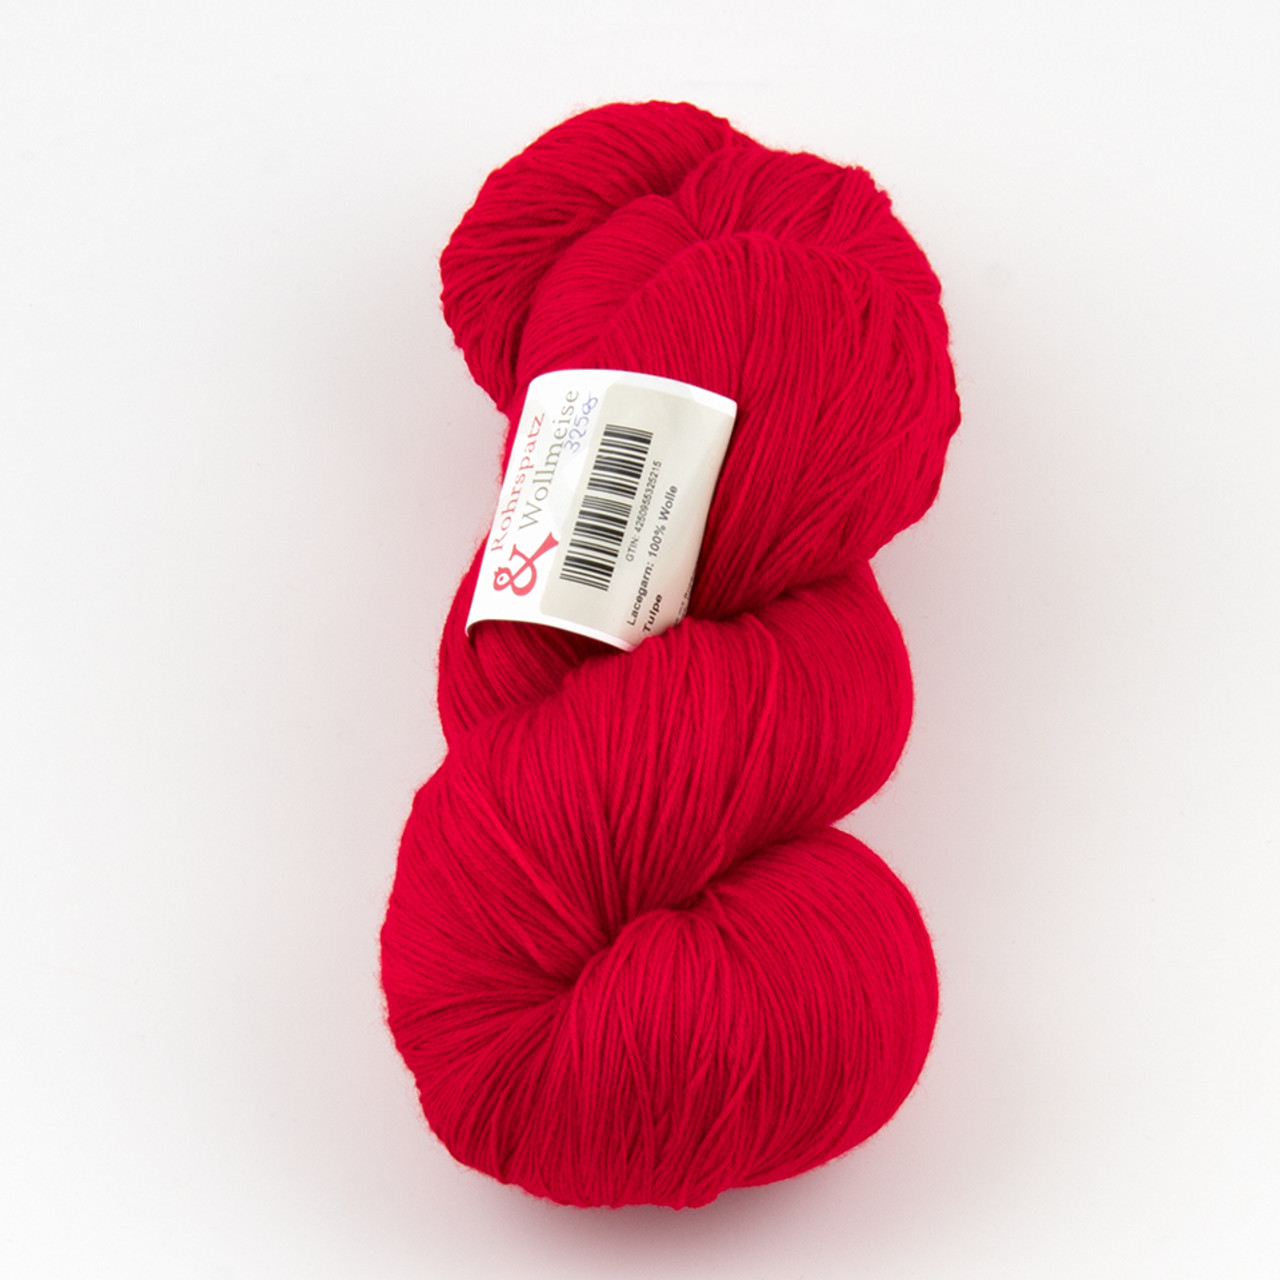 Wollmeise, Lace Tulpe at The Loopy Ewe